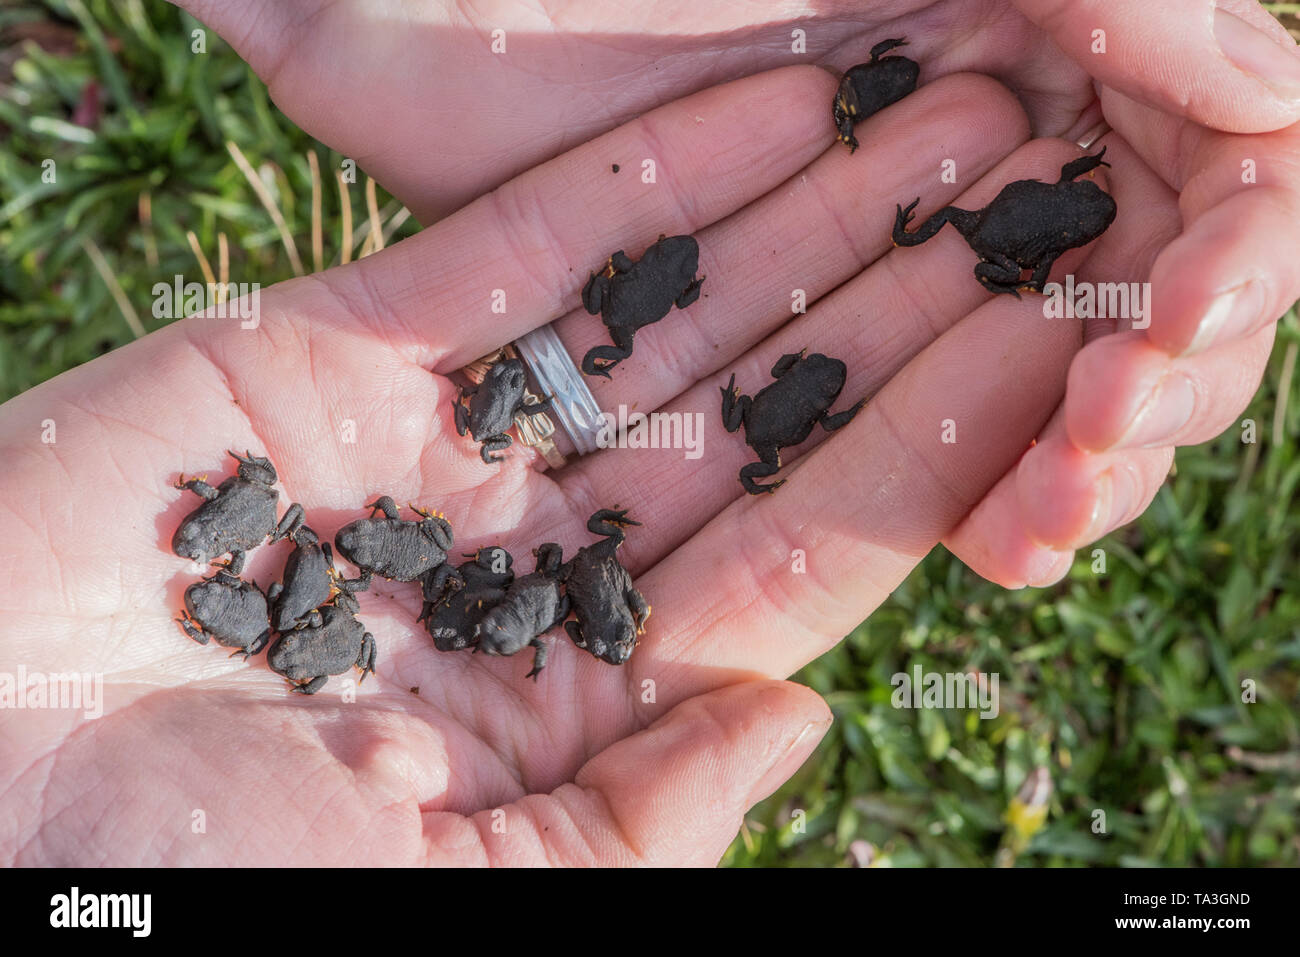 Newly metamorphosed warty toadlets (Rhinella spinulosa) being held in cupped hands. Stock Photo